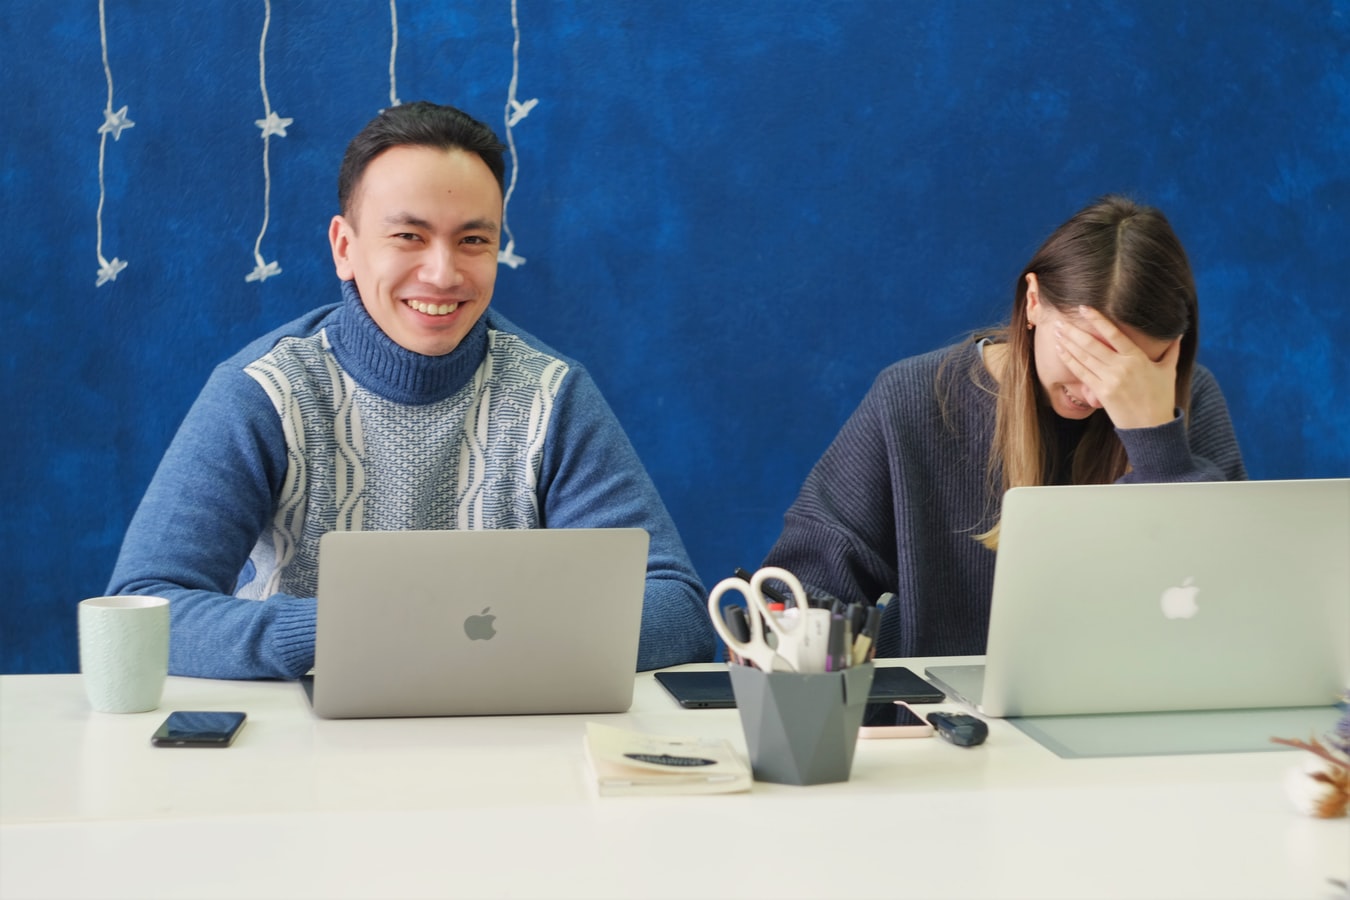 Smiling coworkers on their laptops.